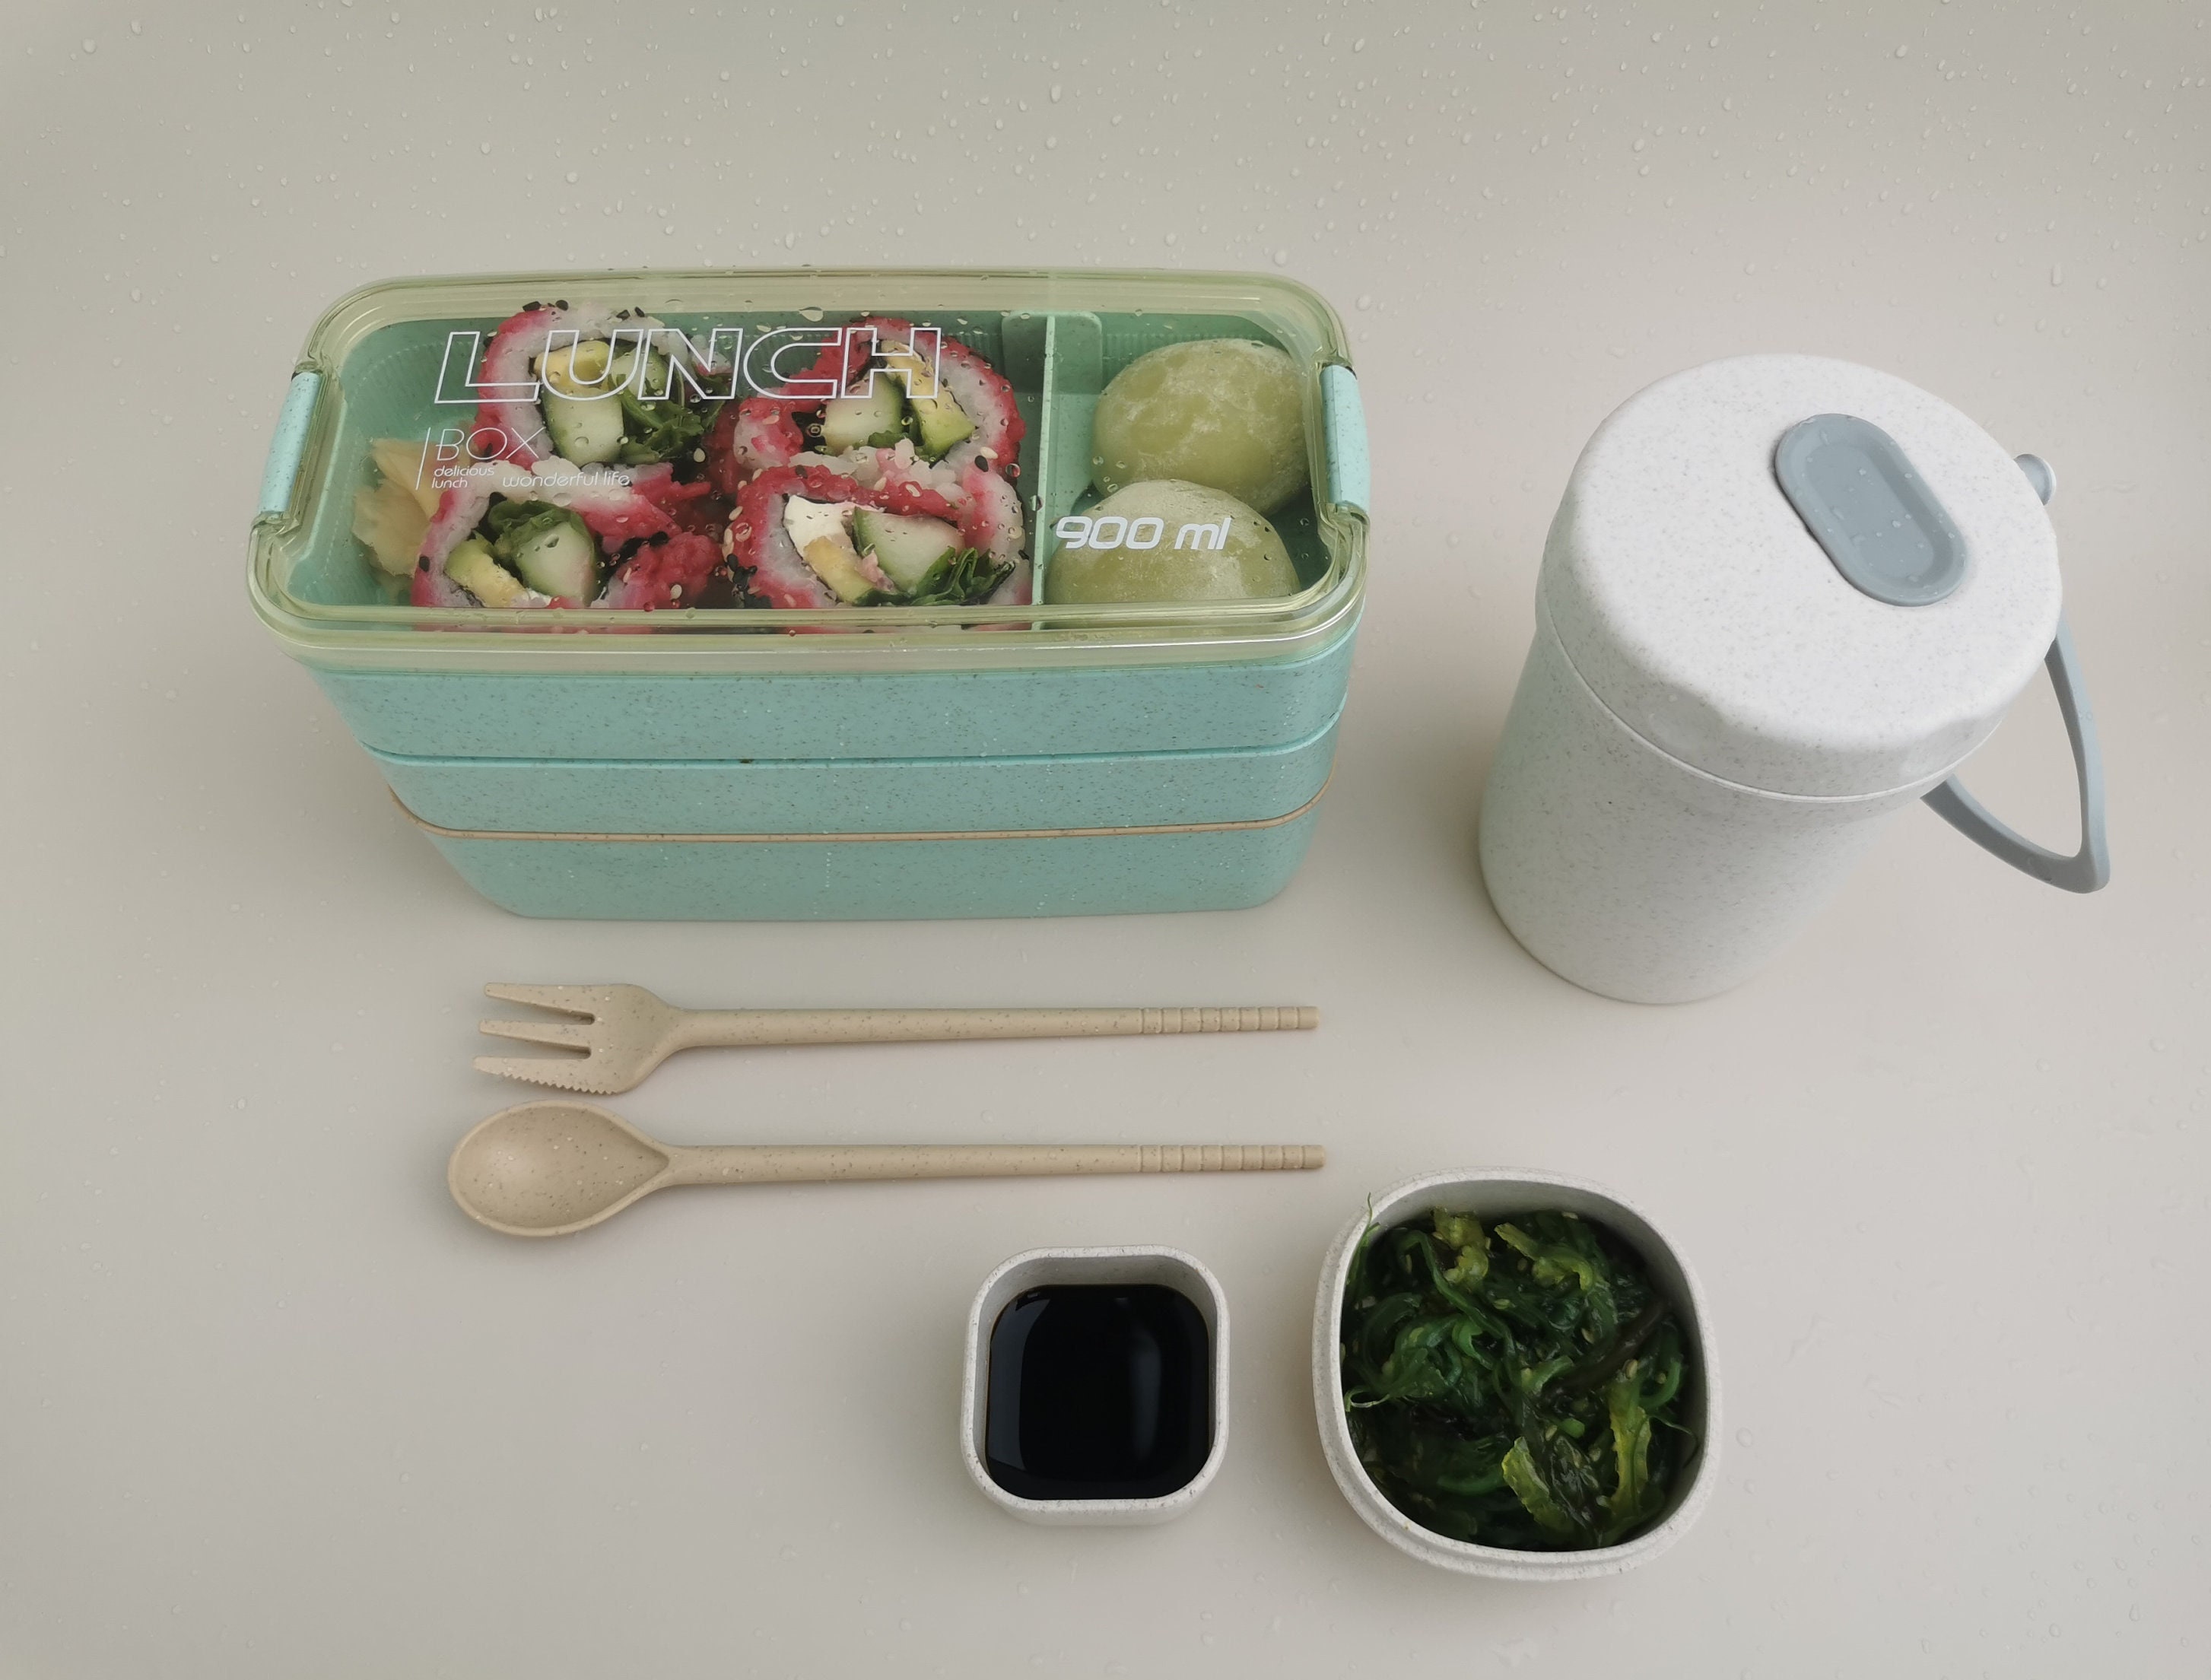 Personalized Eco Friendly Bento Box Lunch Box and / or Soup Cup